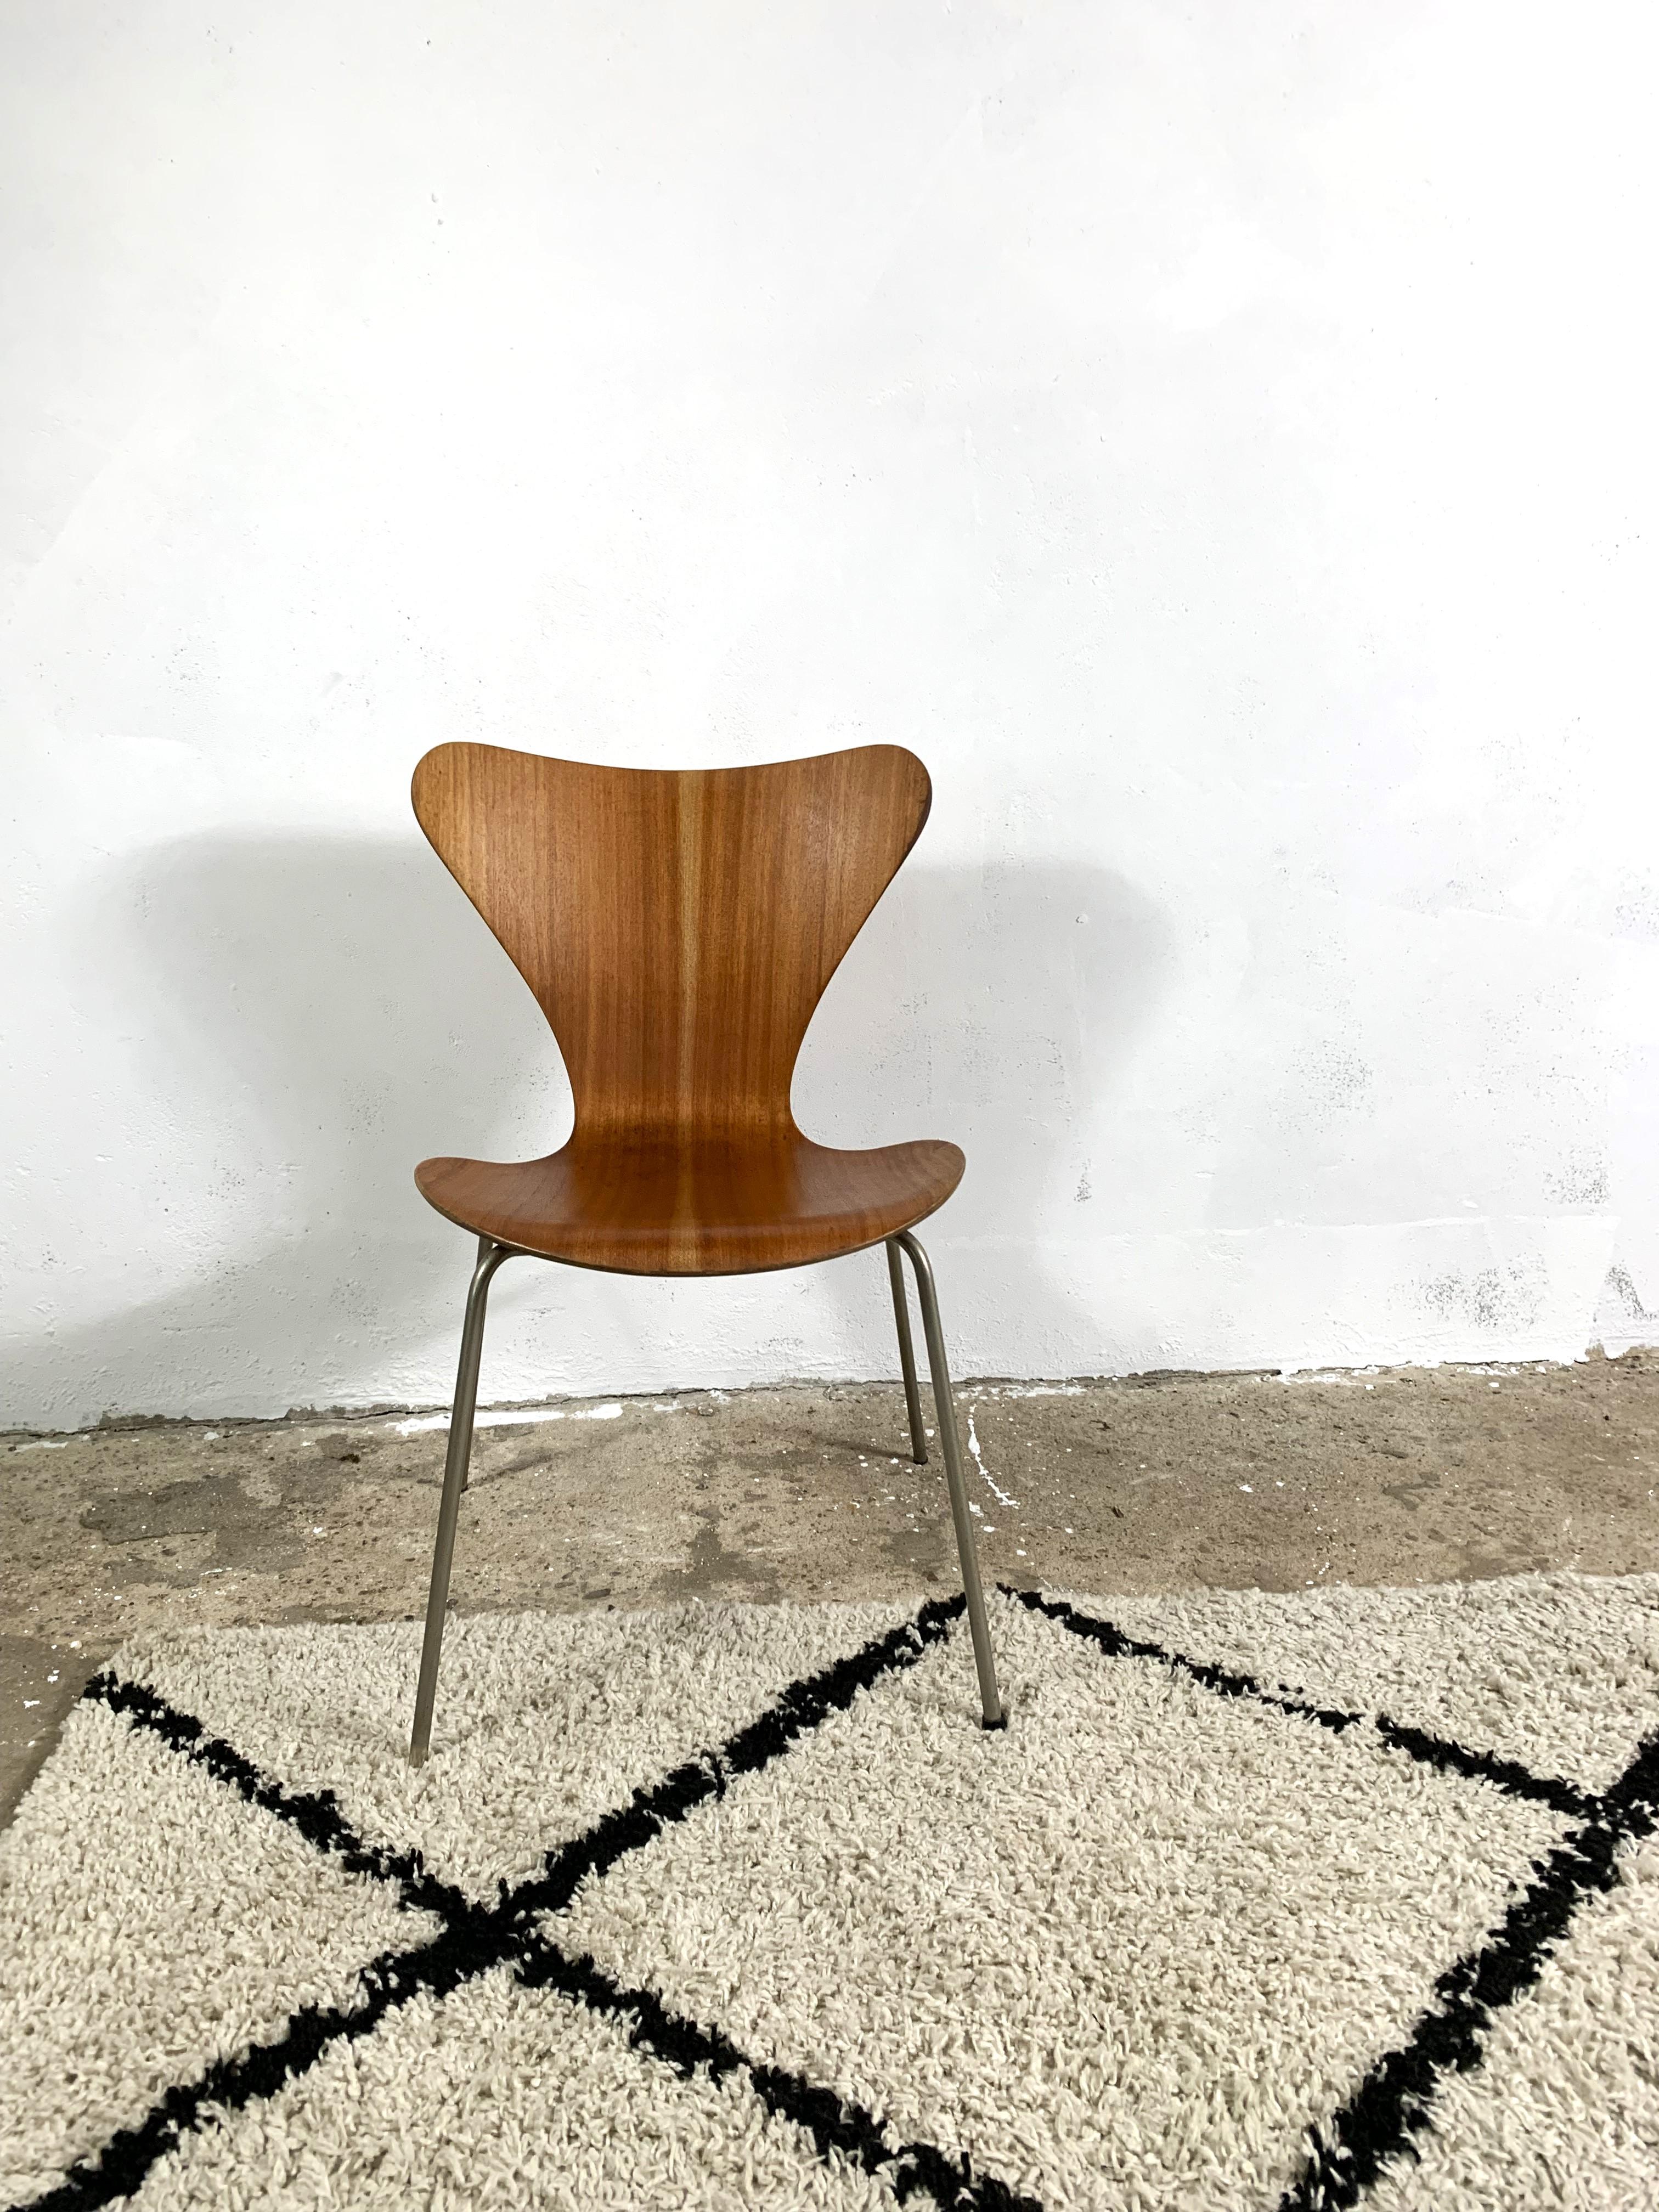 3107 chair designed by Arne Jacobsen for Fritz Hansen, teak veneer. This chair is also called the butterfly chair because of this unique shape. The chair has been renovated and oiled. Iconic object!.